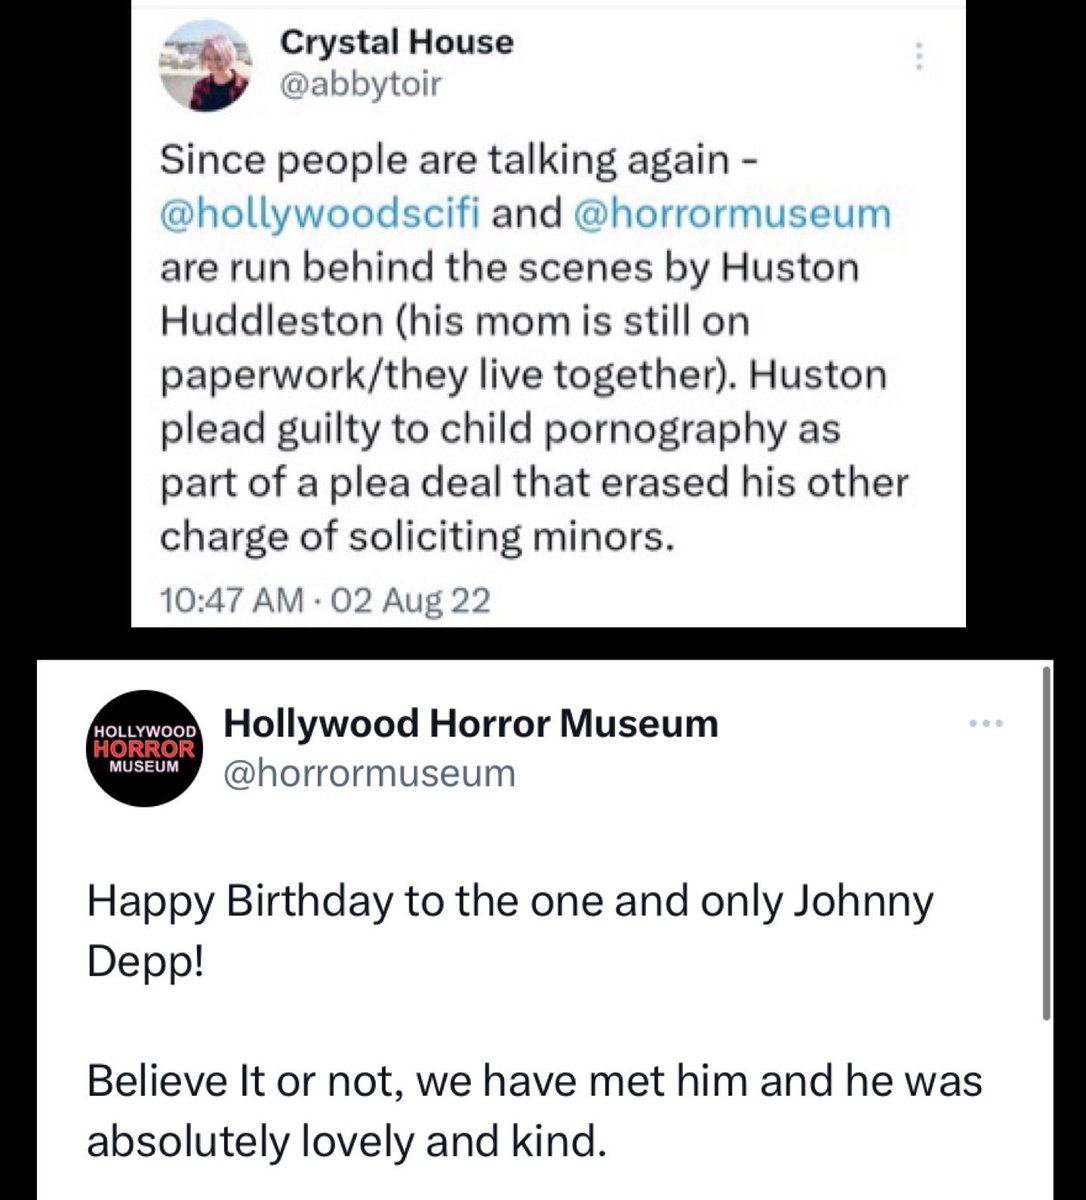 This is WILD!!! The people that defend Johnny Depp and the people he defends are FAR TOO OFTEN convicted predators of the worst most despicable type. #hollywoodhorrormuseum #JohnnyDeppisawifebeater